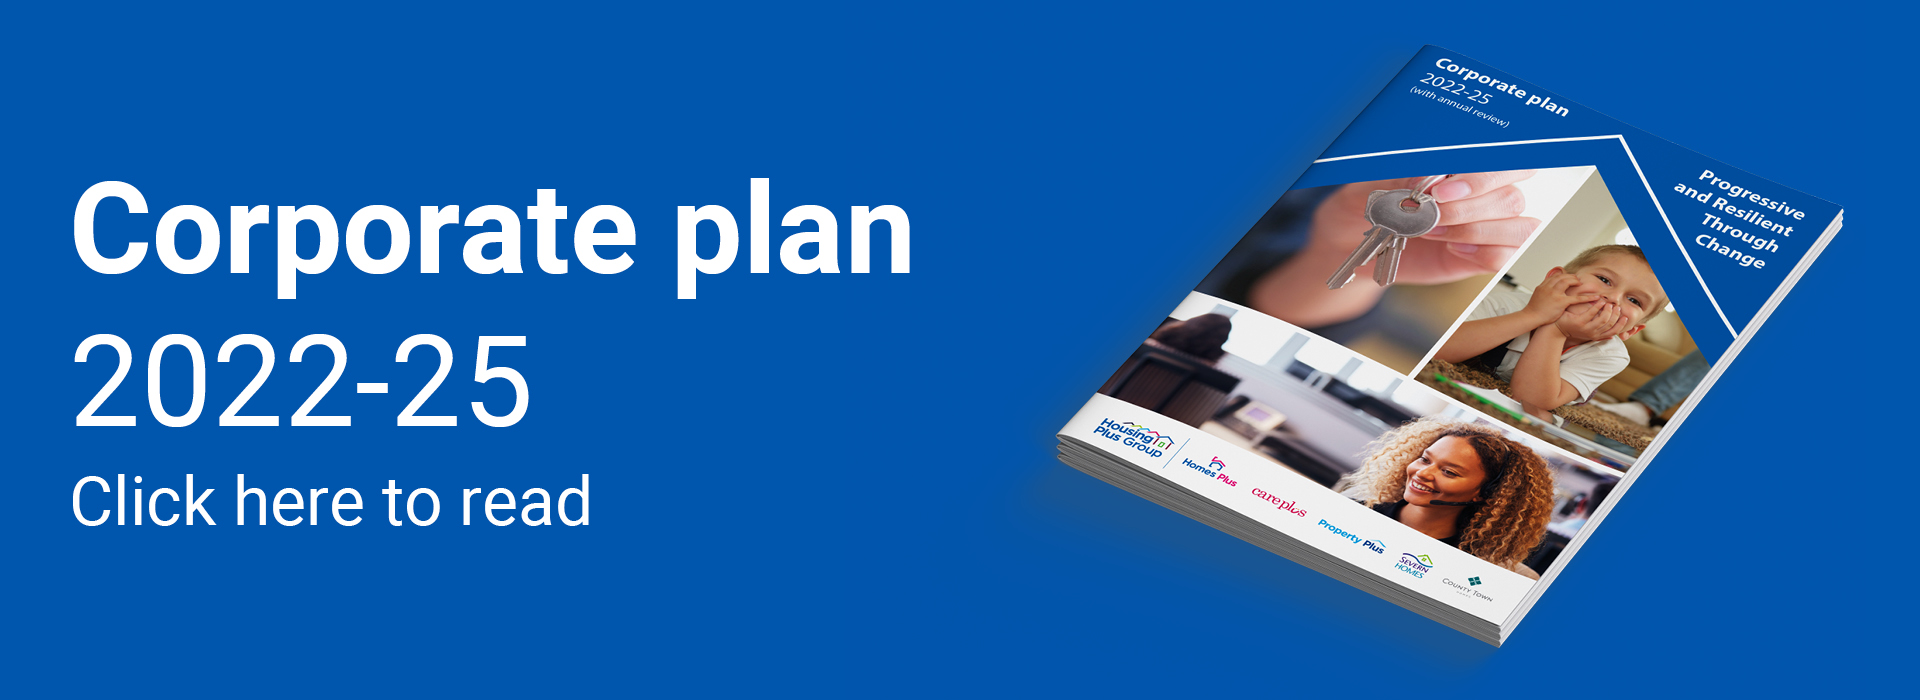 Corporate plan 2022-25 - click here to read